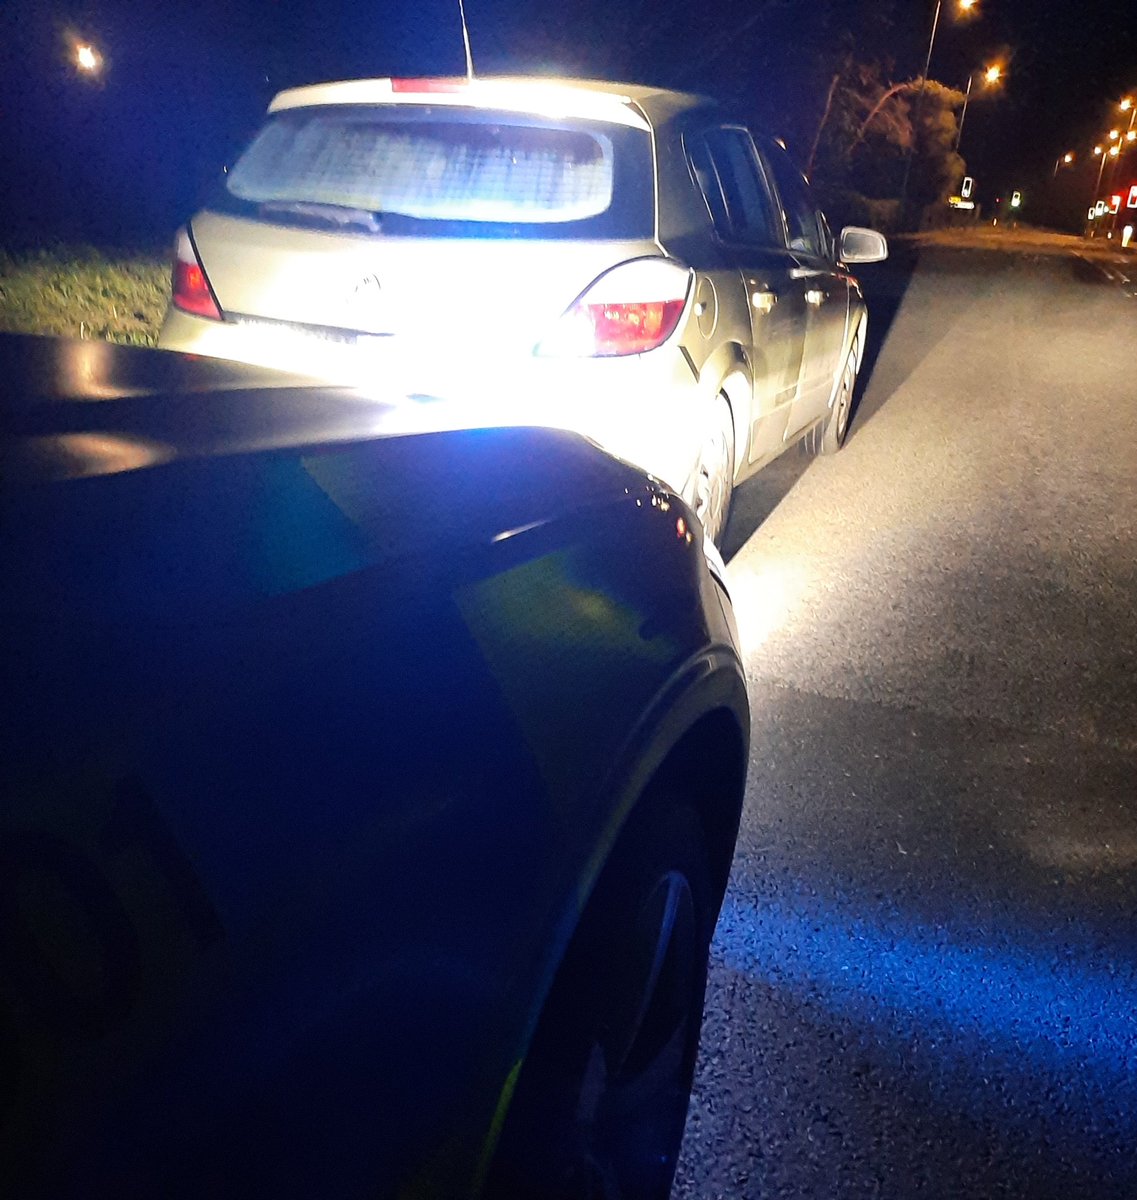 #RPU stopped this vehicle on the A350 near Lacock at midnight due to the manner of driving. The driver had never passed a test to EU standard and had been in the UK over a year. Vehicle #seized